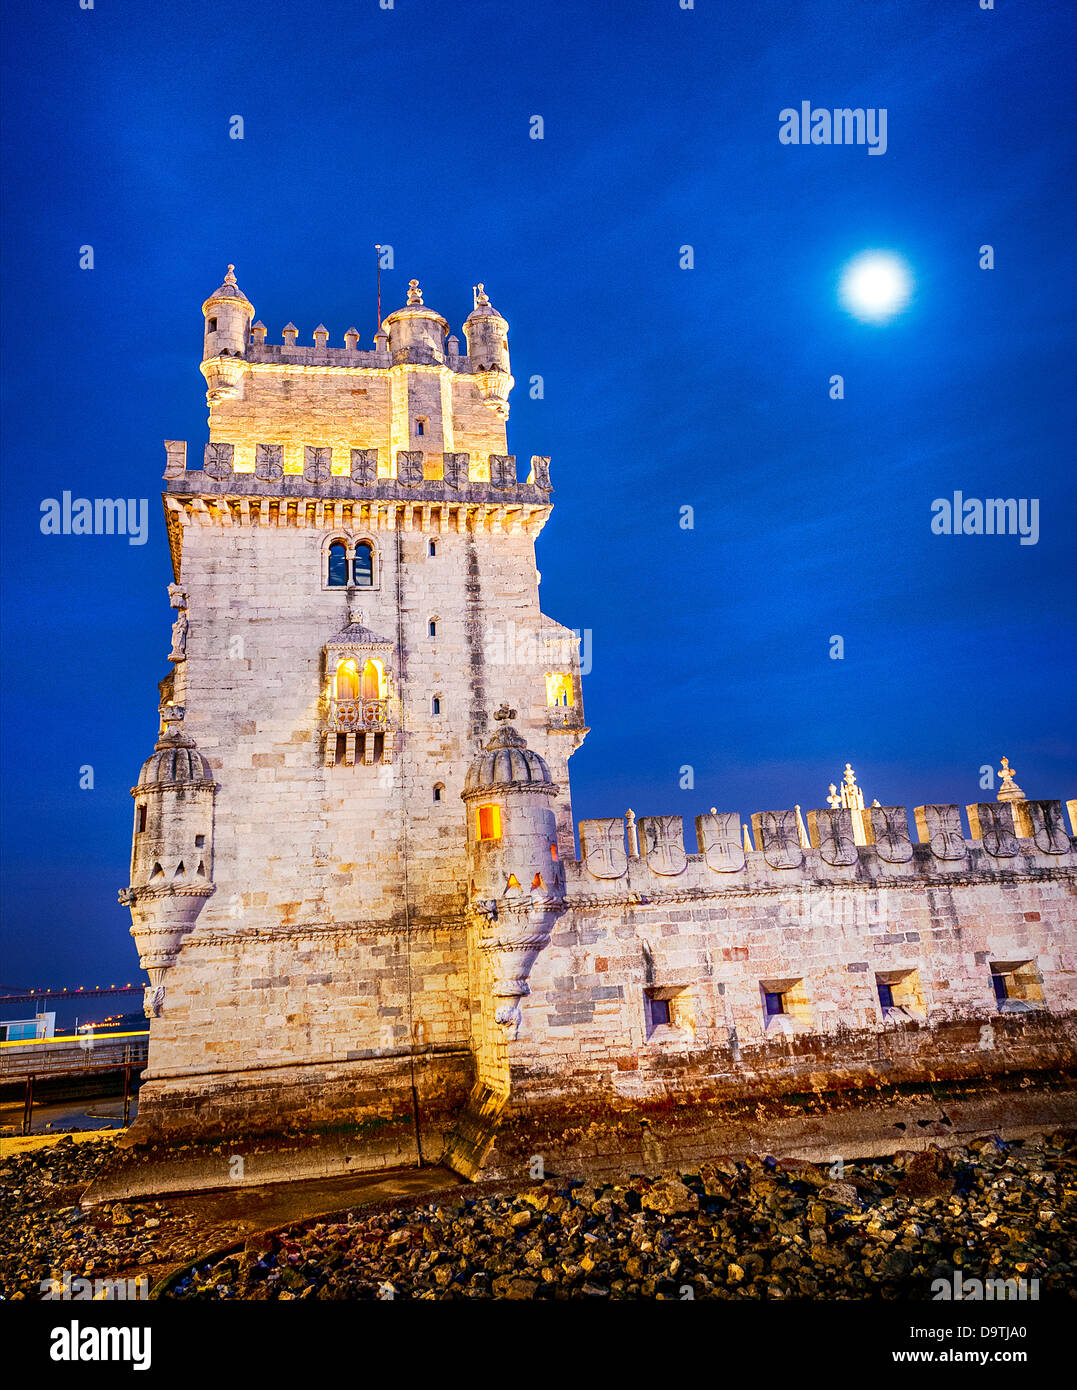 Belem tower in Lisbon city, Portugal Stock Photo